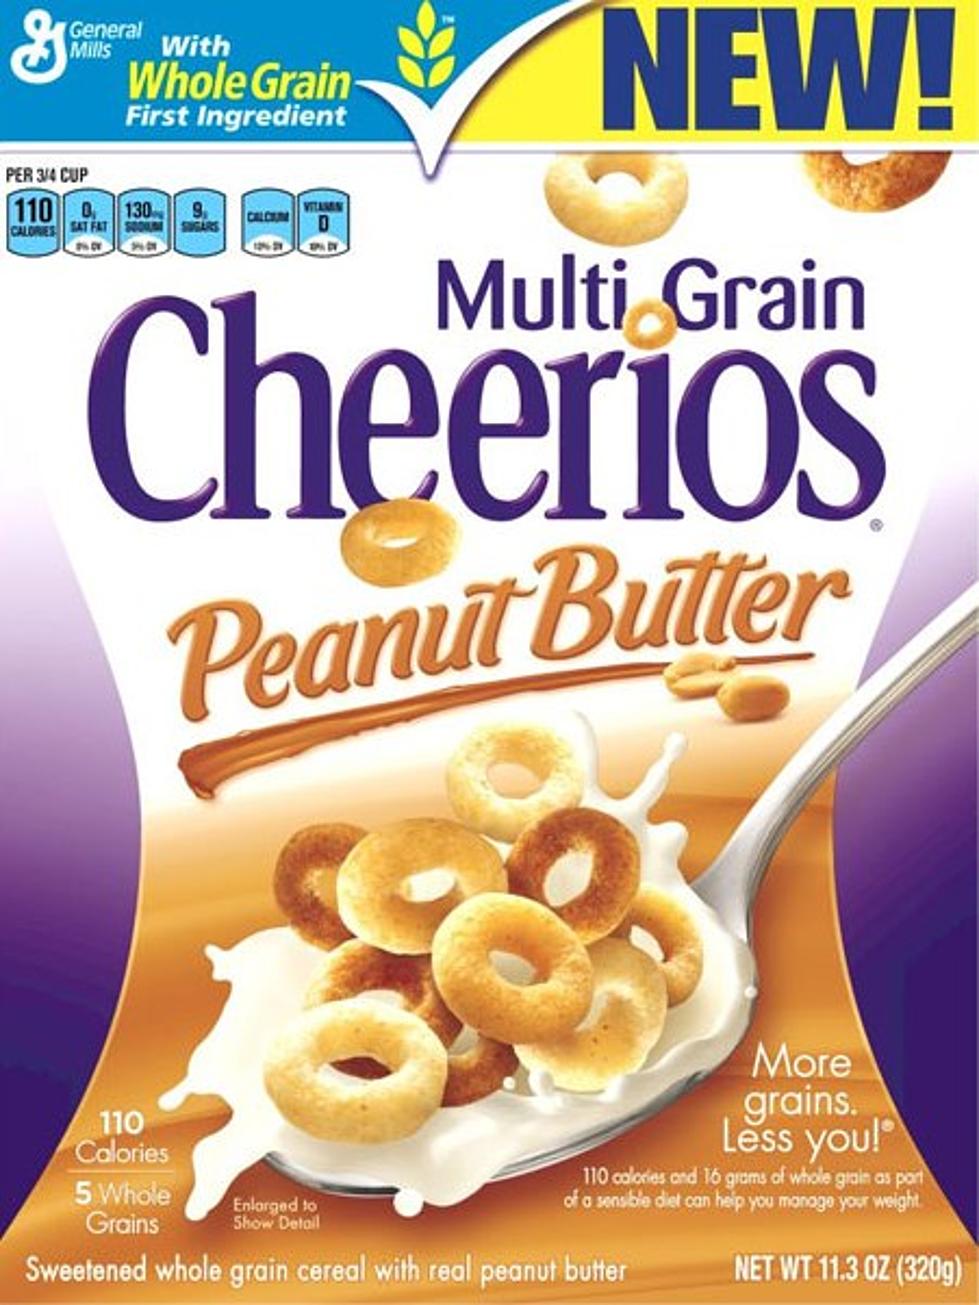 New Peanut Butter Cheerios Upsets Parents Of Children With Food Allergies [VIDEO]